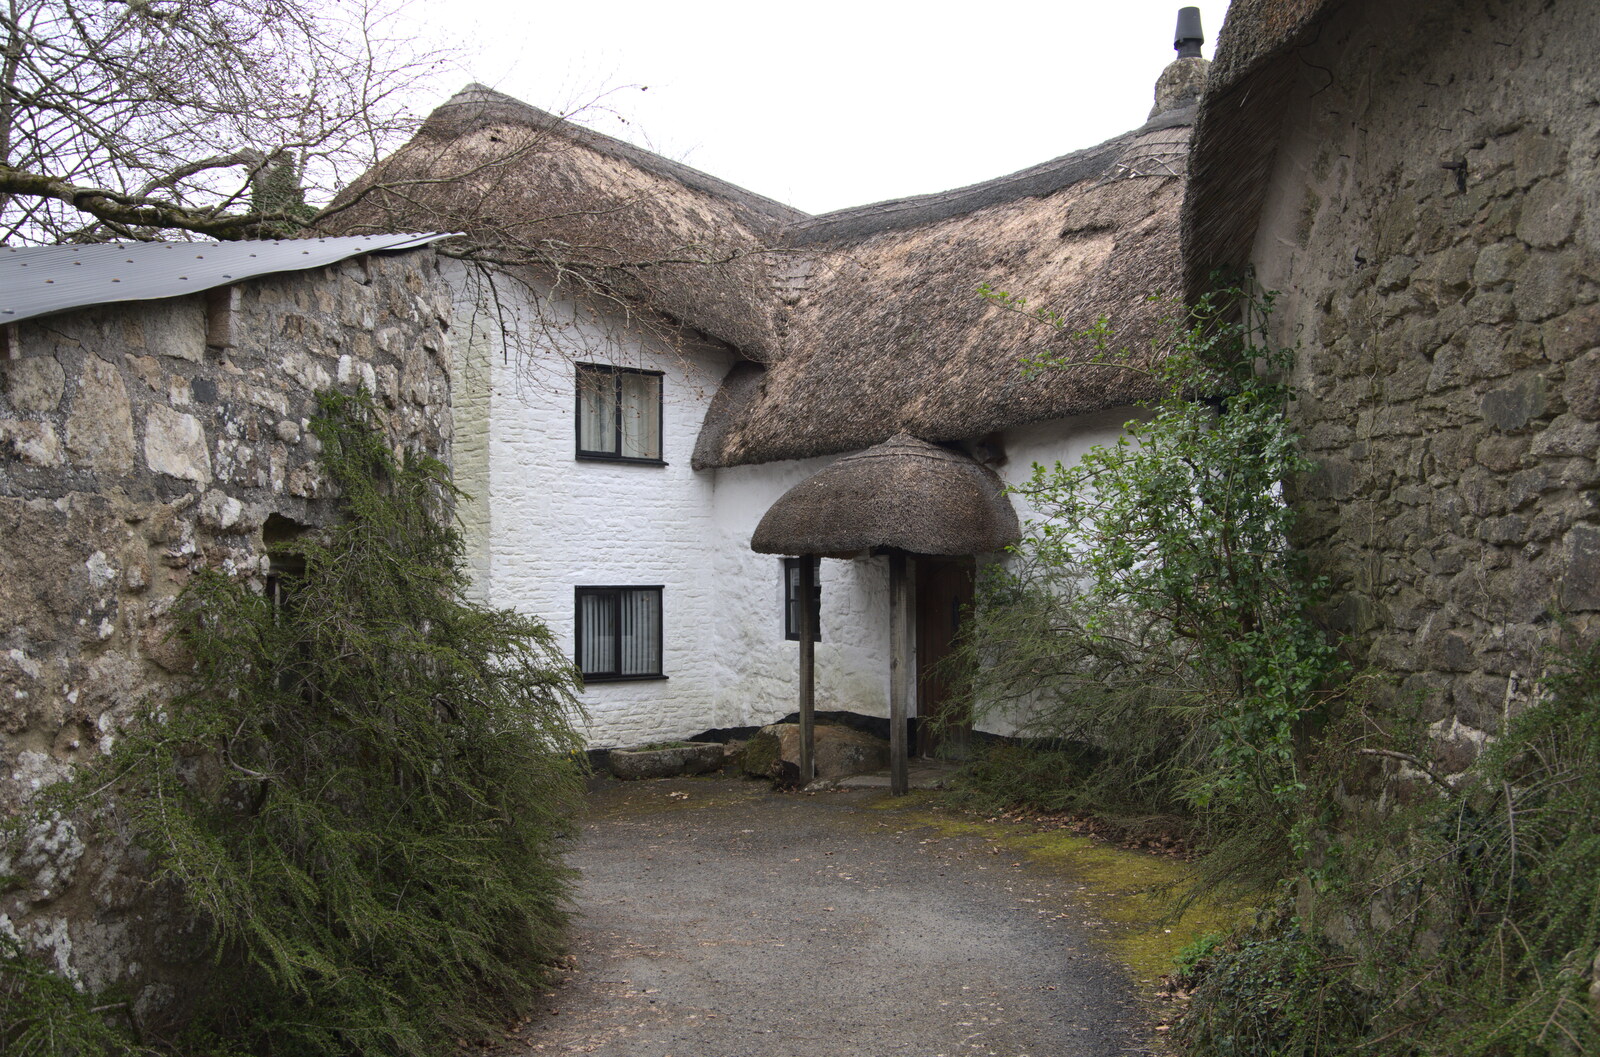 A Dartmoor thatched cottage from Easter in South Zeal and Moretonhampstead, Devon - 9th April